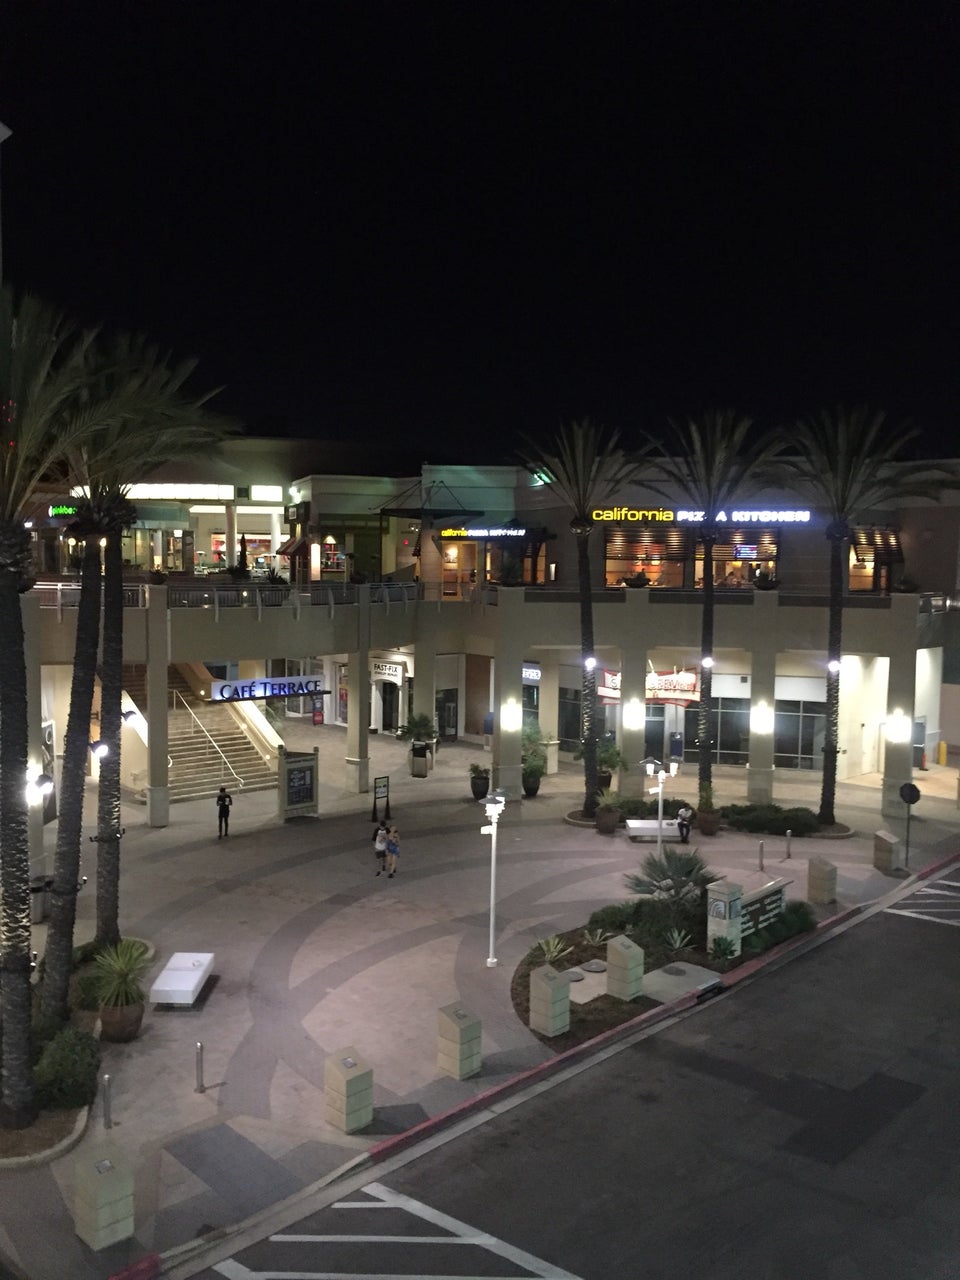 Store Directory for Fashion Valley - A Shopping Center In San Diego, CA - A  Simon Property